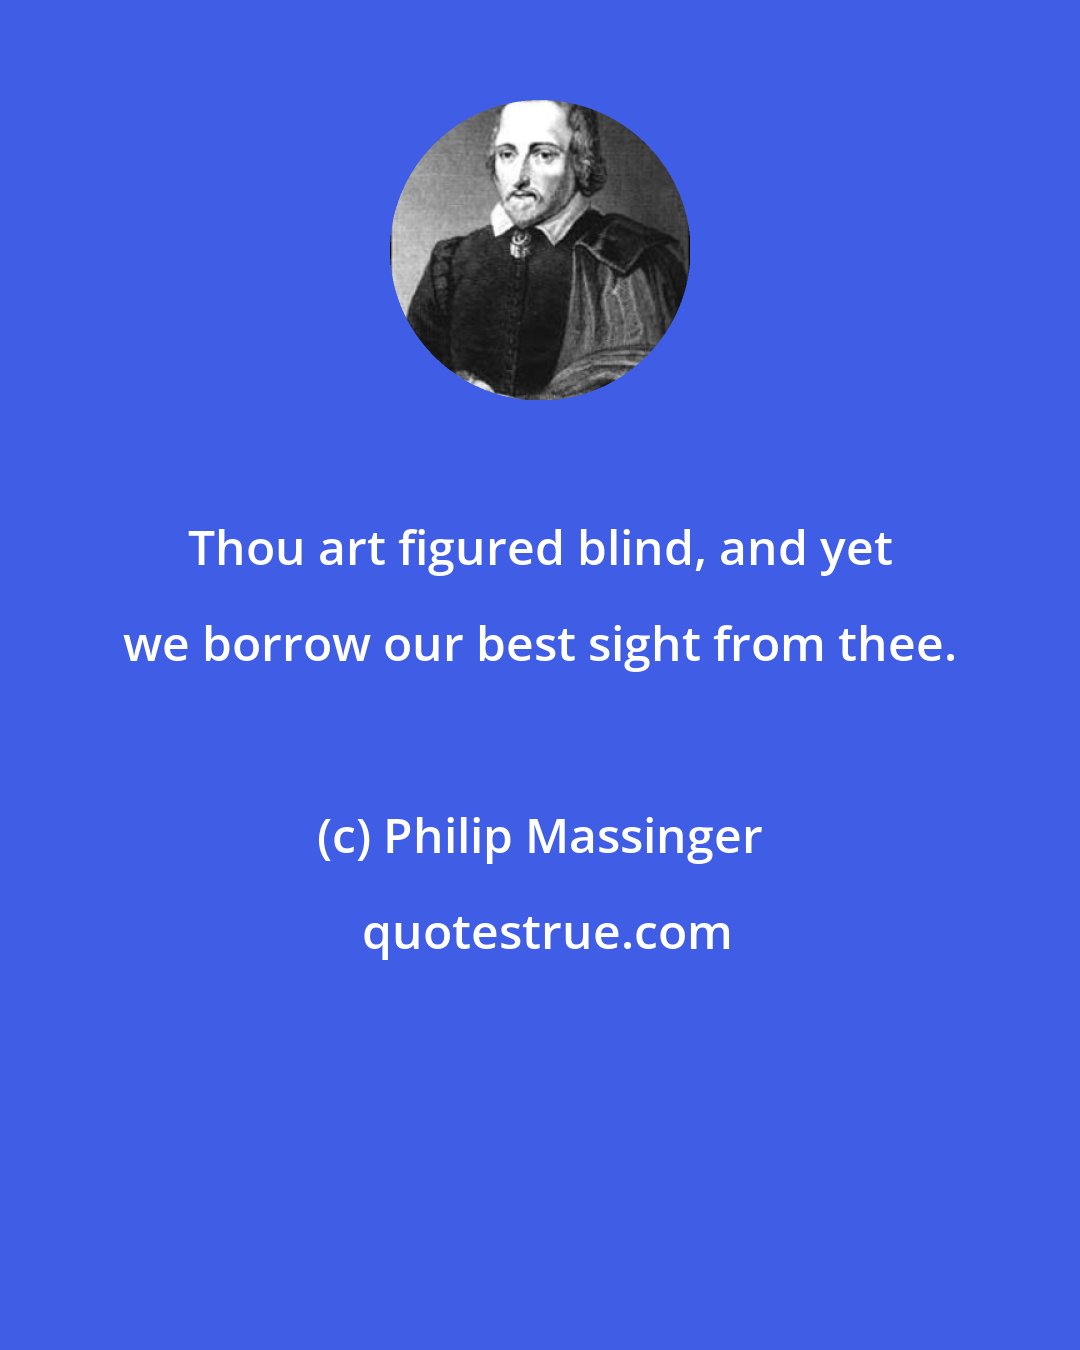 Philip Massinger: Thou art figured blind, and yet we borrow our best sight from thee.